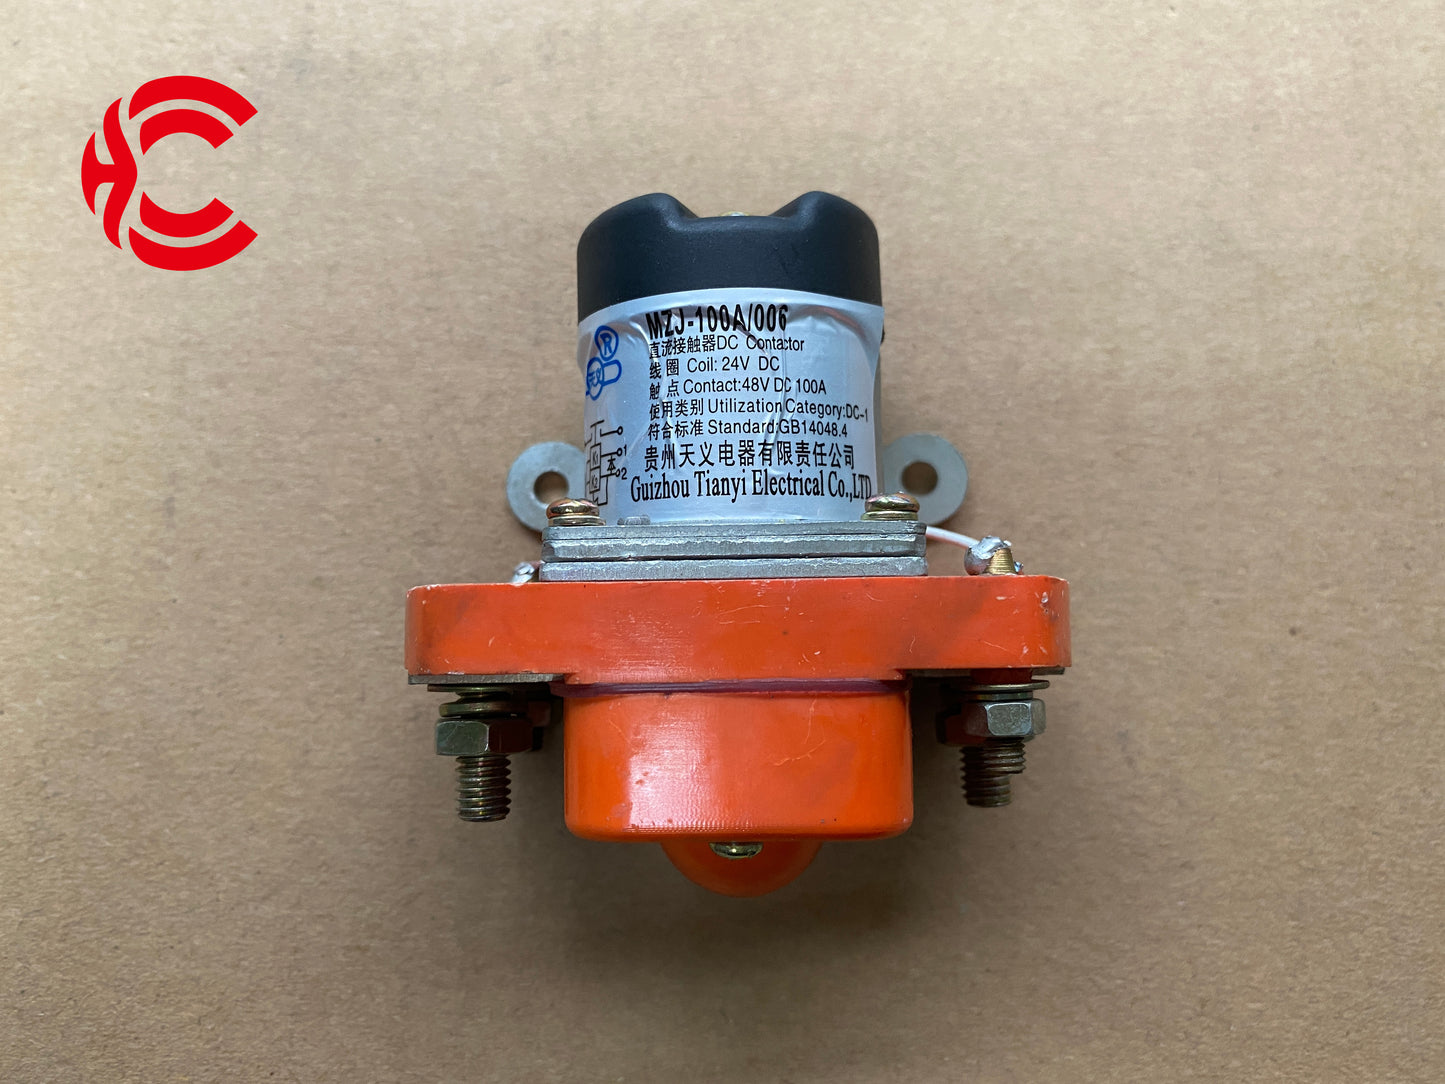 OEM: MZJ-100A/006 24VMaterial: ABS metalColor: black silverOrigin: Made in ChinaWeight: 300gPacking List: 1* Direct Current(DC) Contactor More ServiceWe can provide OEM Manufacturing serviceWe can Be your one-step solution for Auto PartsWe can provide technical scheme for you Feel Free to Contact Us, We will get back to you as soon as possible.